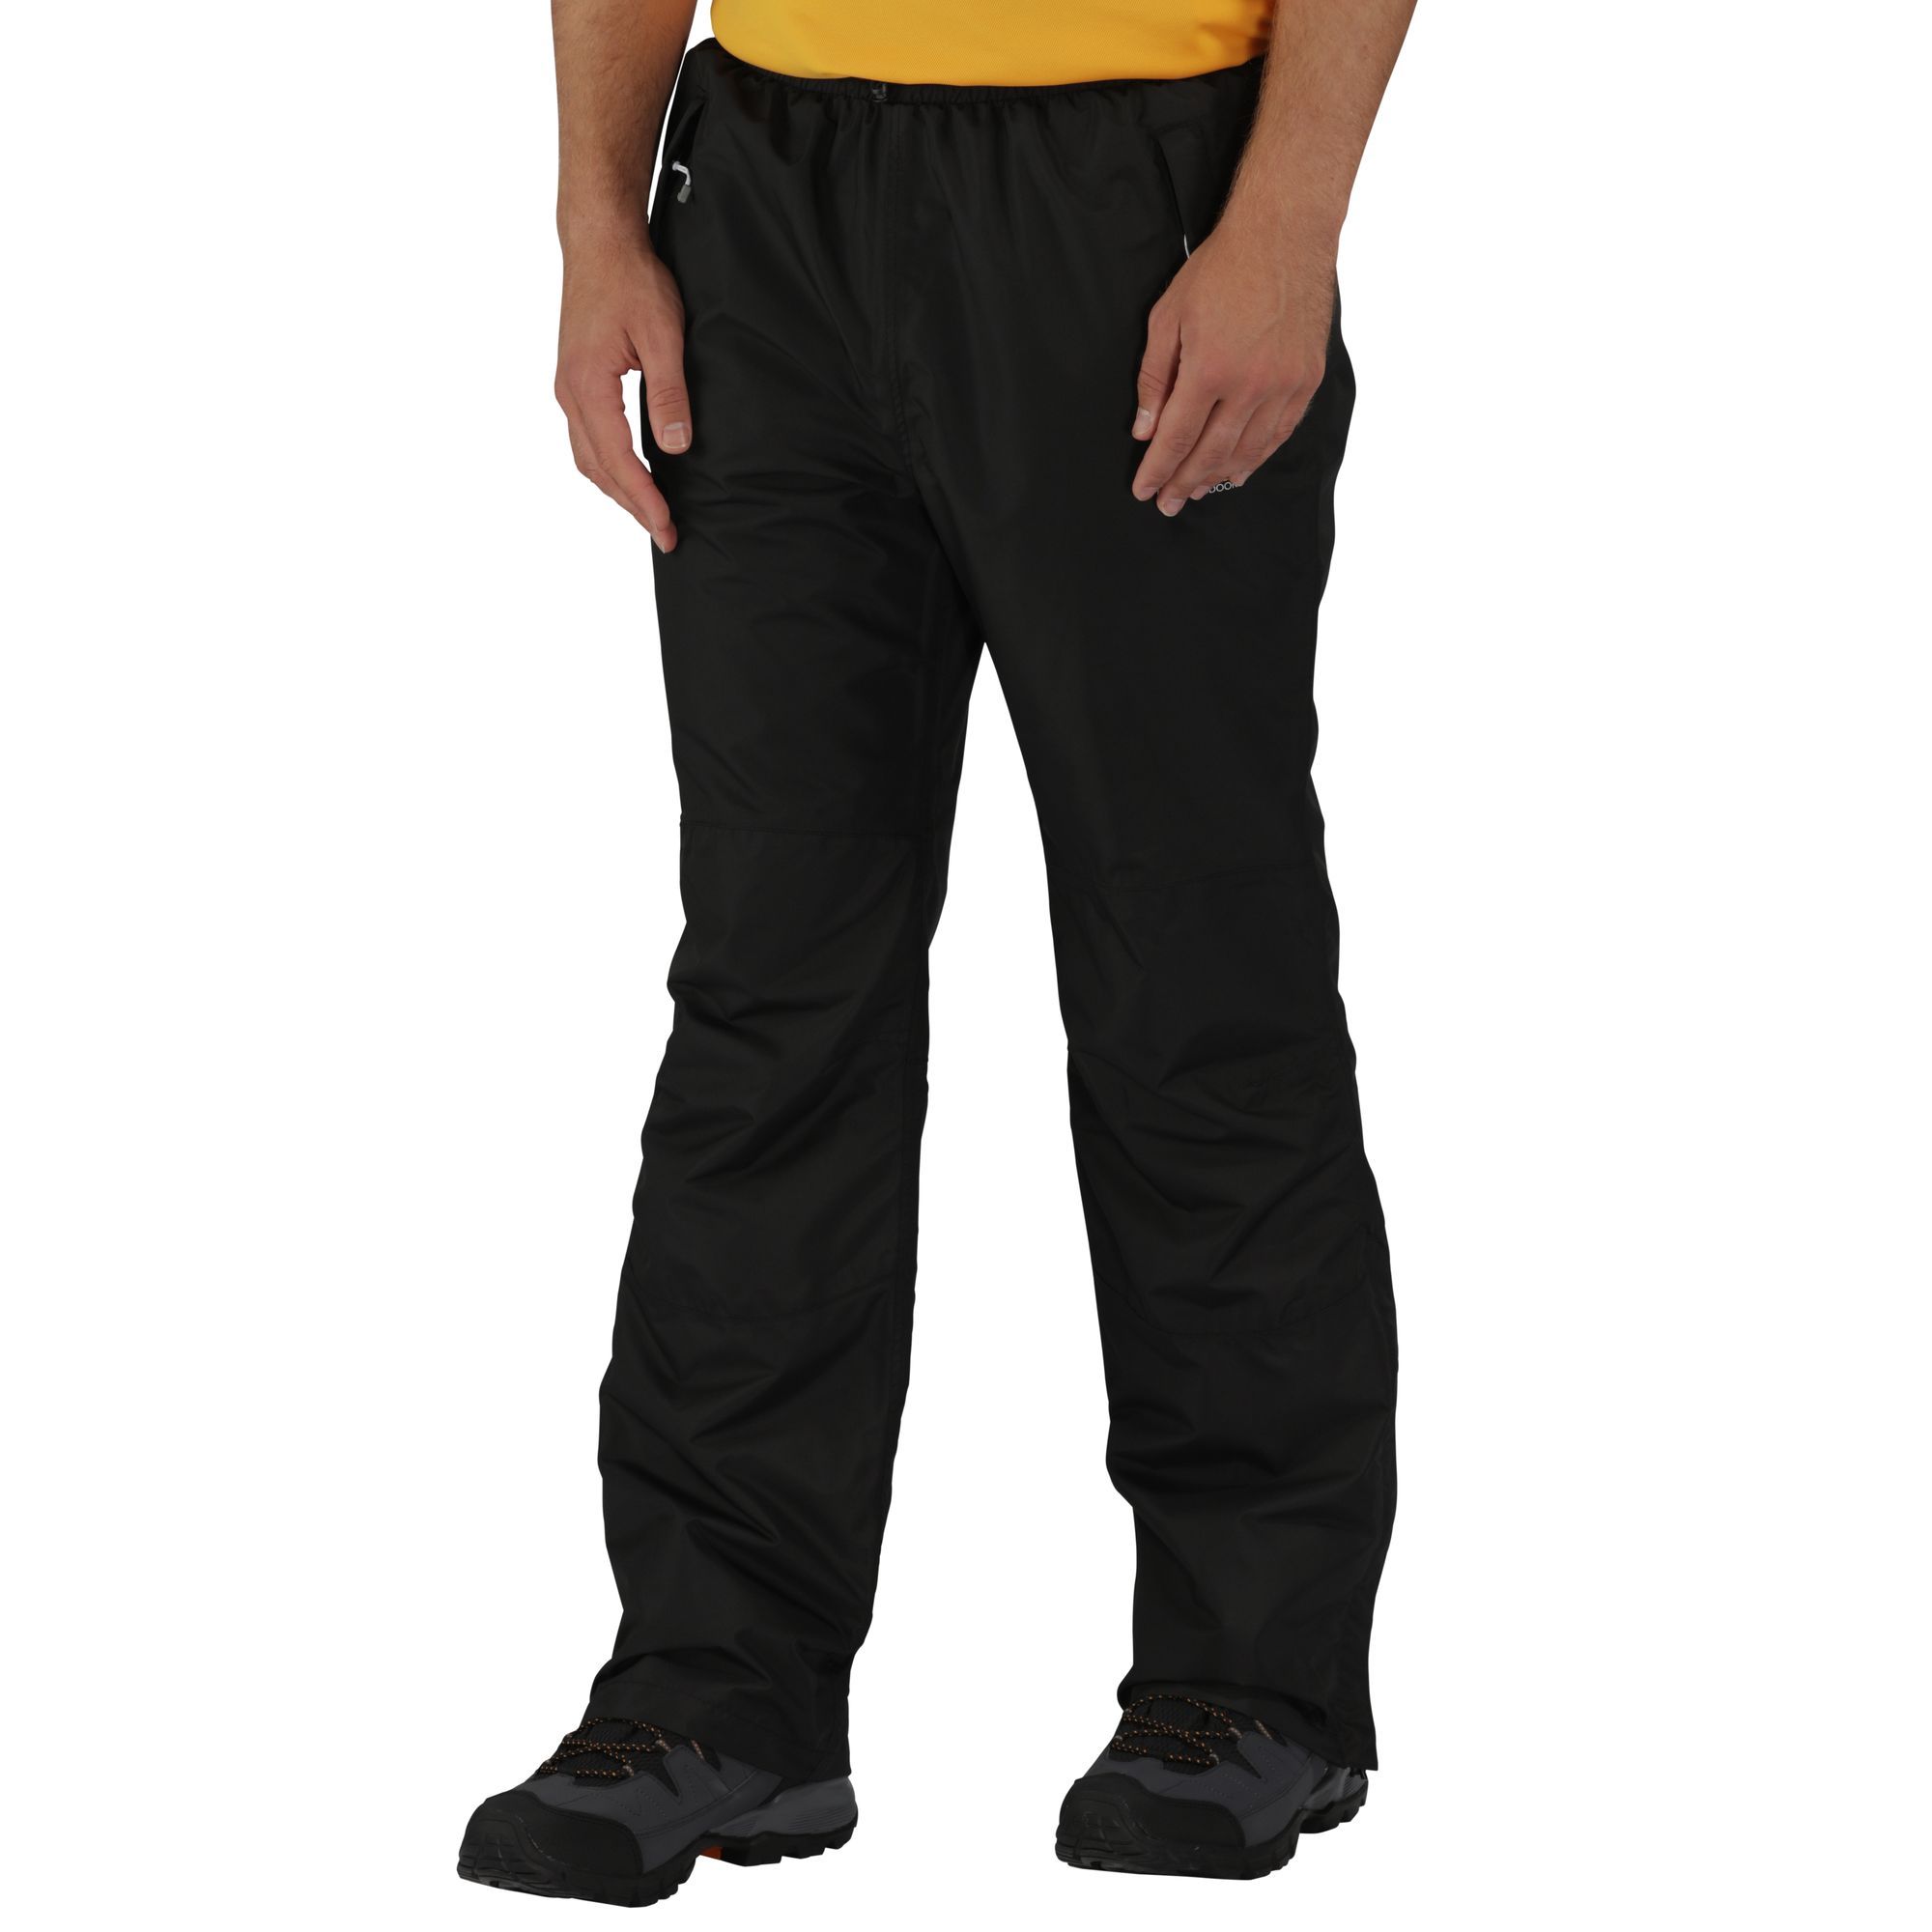 Womens waterproof trousers made of Isotex 5000 coated Polyester fabric. Durable water repellent finish. Part mesh, part Polyester lining. Taped seams. Elasticated and drawcord waist. Zip opening at ankle. Ideal for wearing outdoors in the rain. 100% Polyester. Short: 29in.